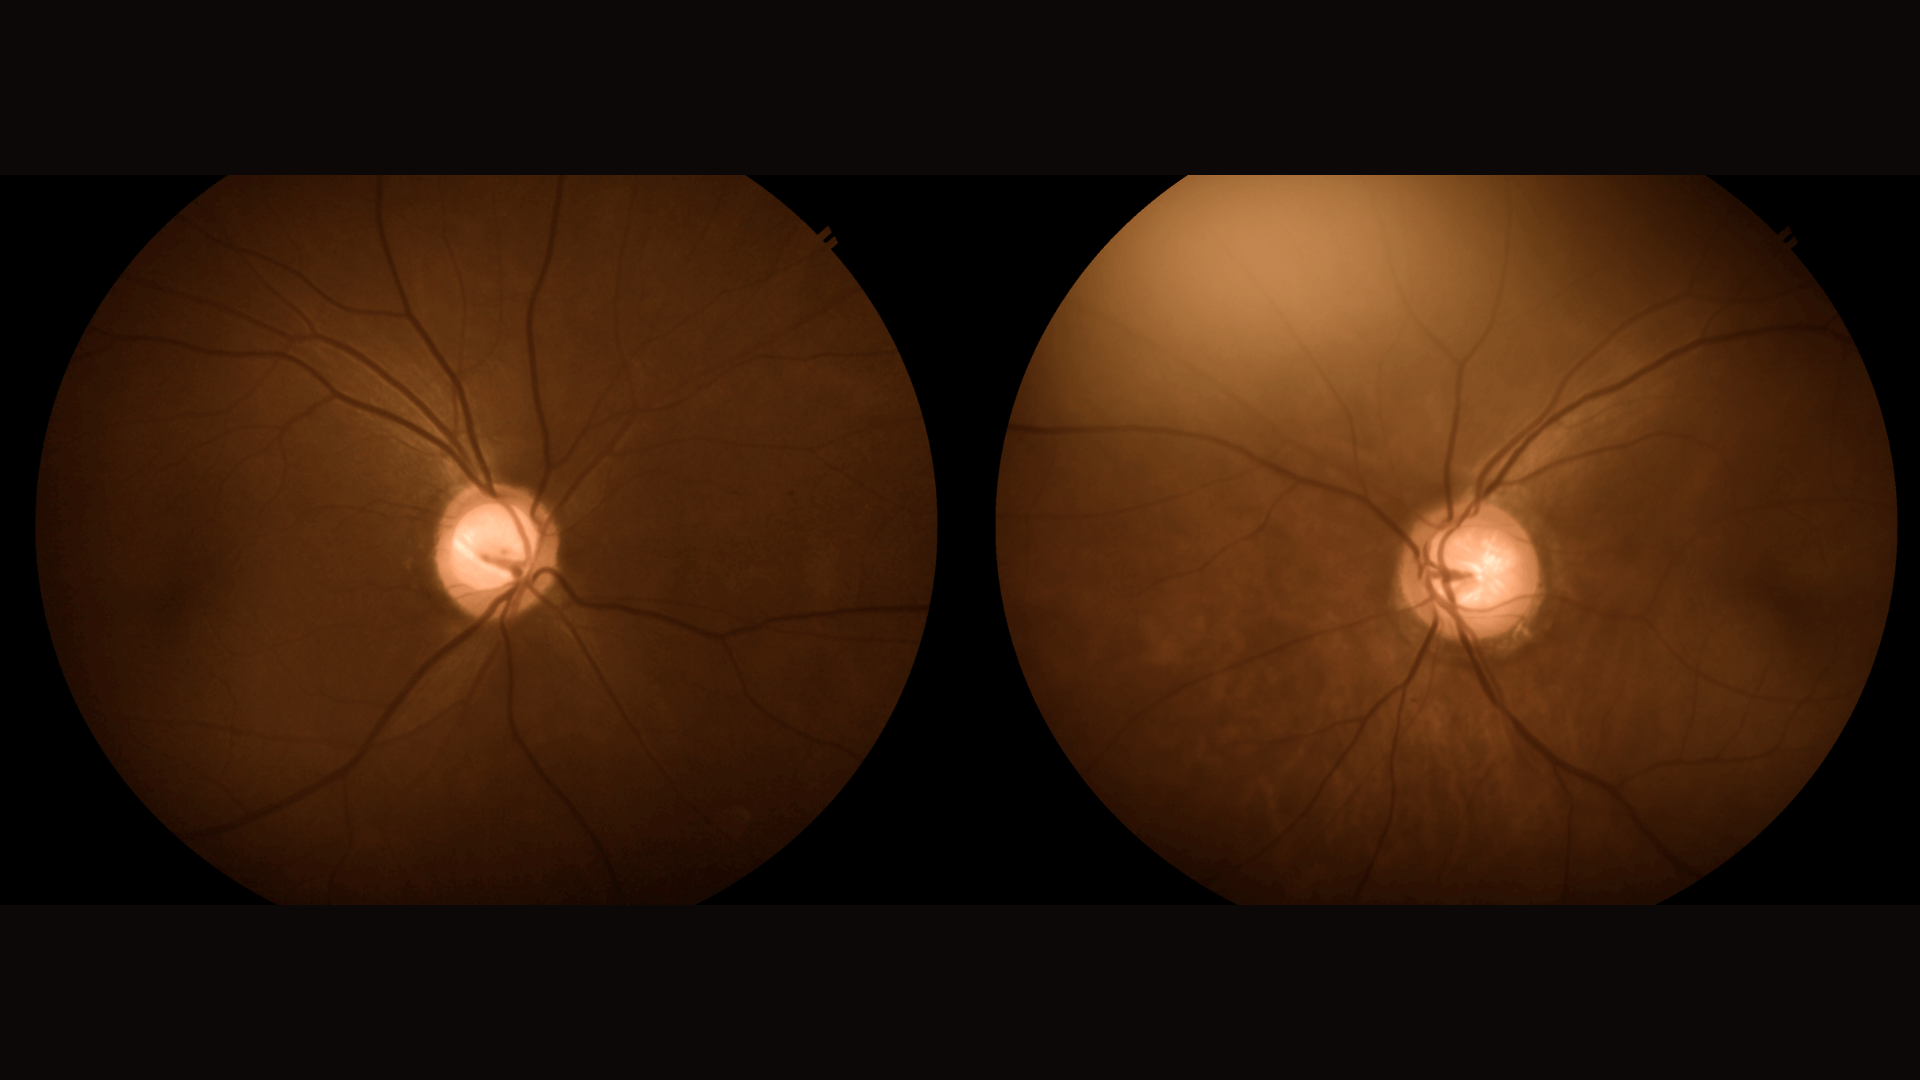 Optic disc photo showing both eyes having large cup to disc ratio on glaucoma case